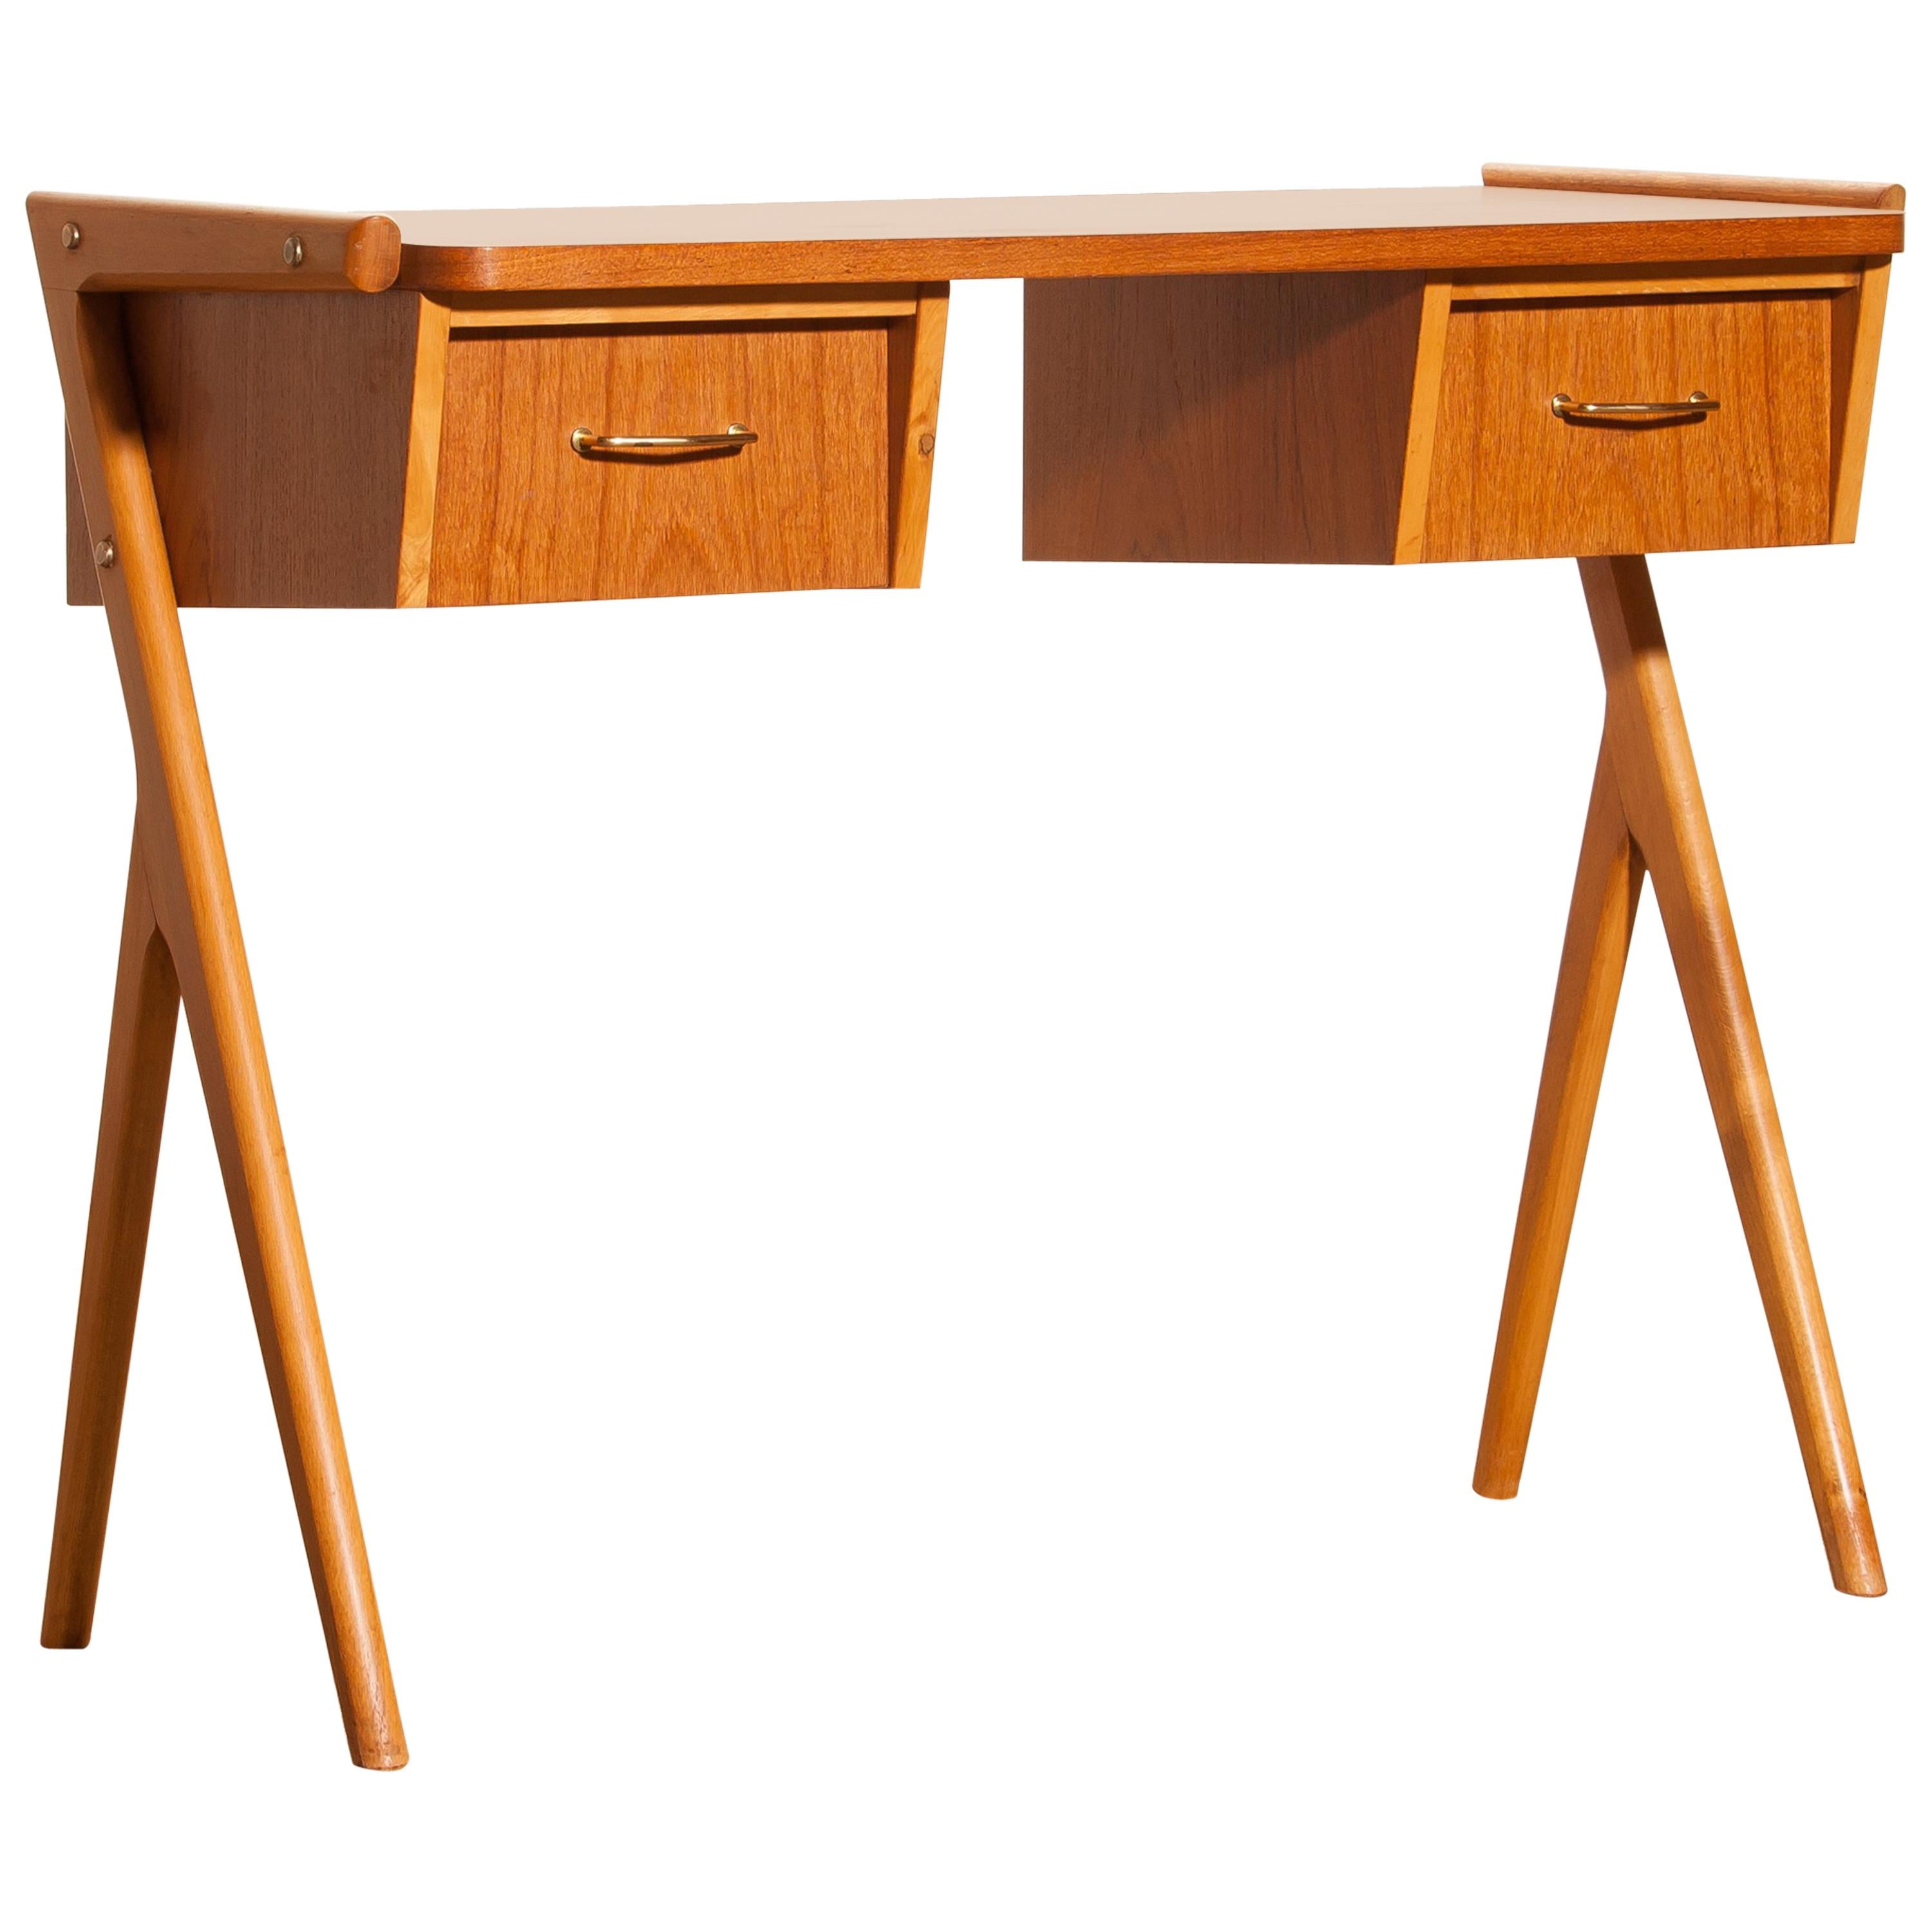 Very beautiful ladies desk from Sweden
The table is made of teak and has two drawers with brass details.
It is in a very nice condition.
Period 1950s.
Dimensions: H 70 cm, W 84 cm, D 40 cm.